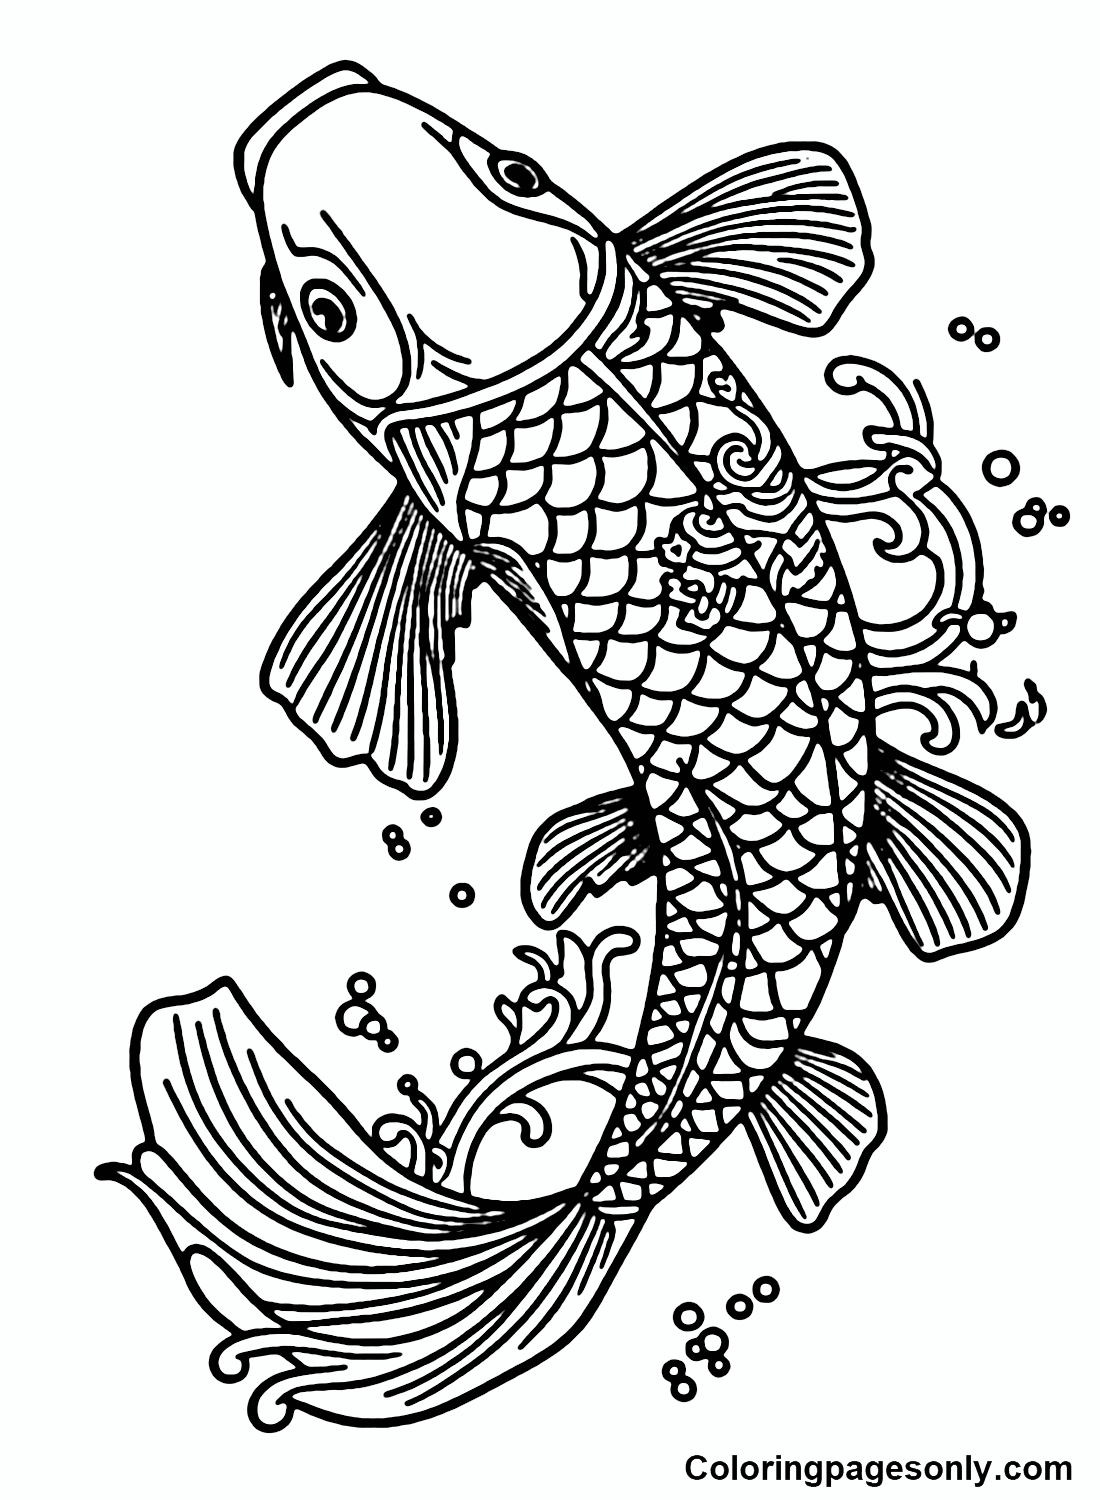 Koi fish coloring pages printable for free download